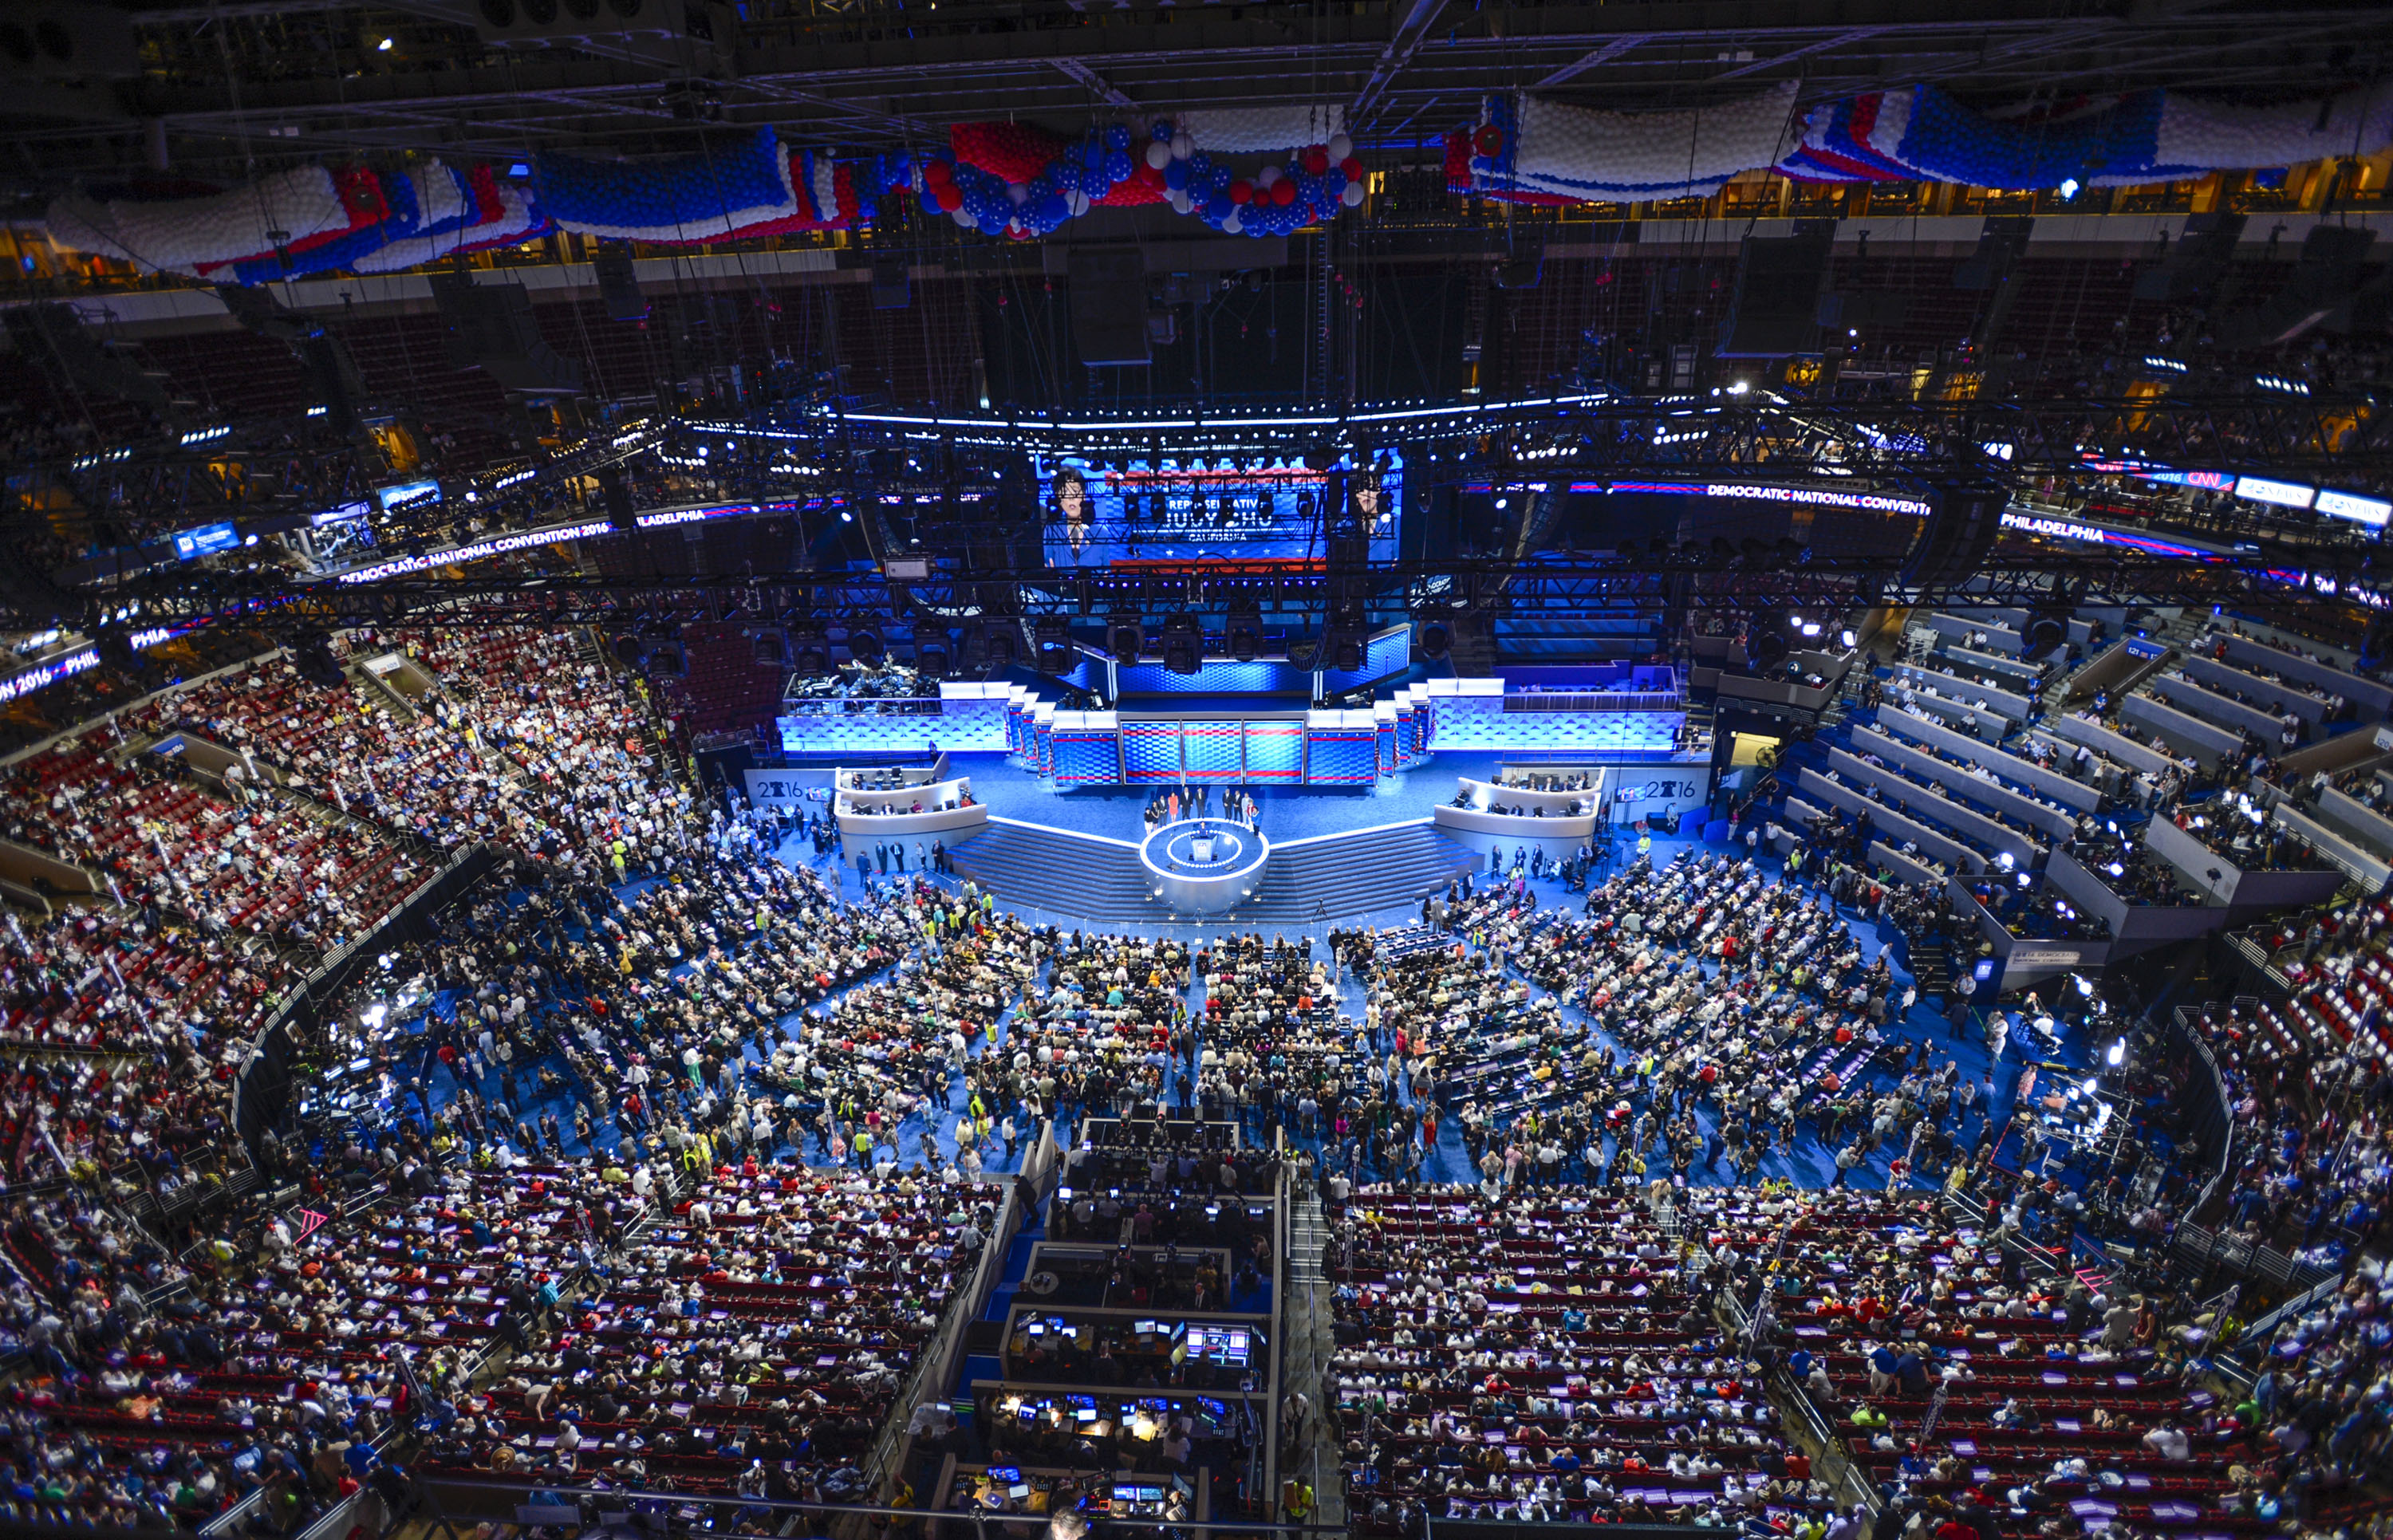 Milwaukee to Host 2020 Democratic National Convention - Election Central3000 x 1931